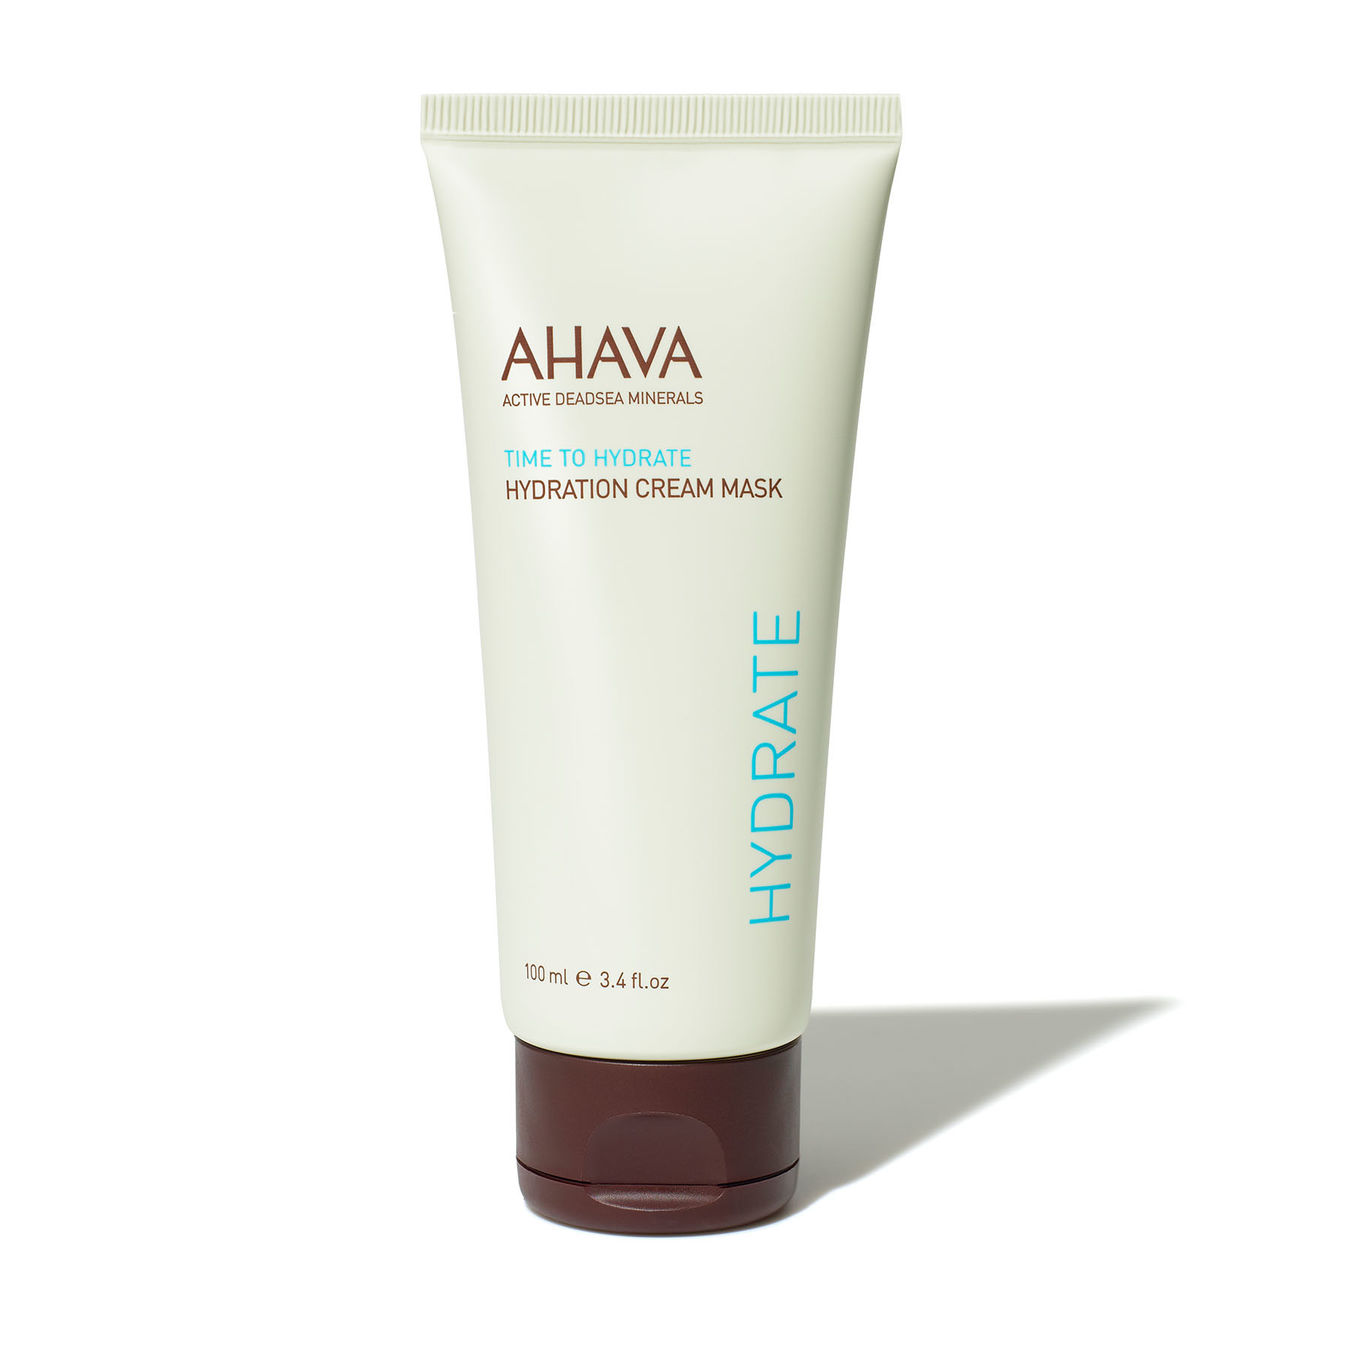 AHAVA time to hydrate time to hydrate Hydration Crea